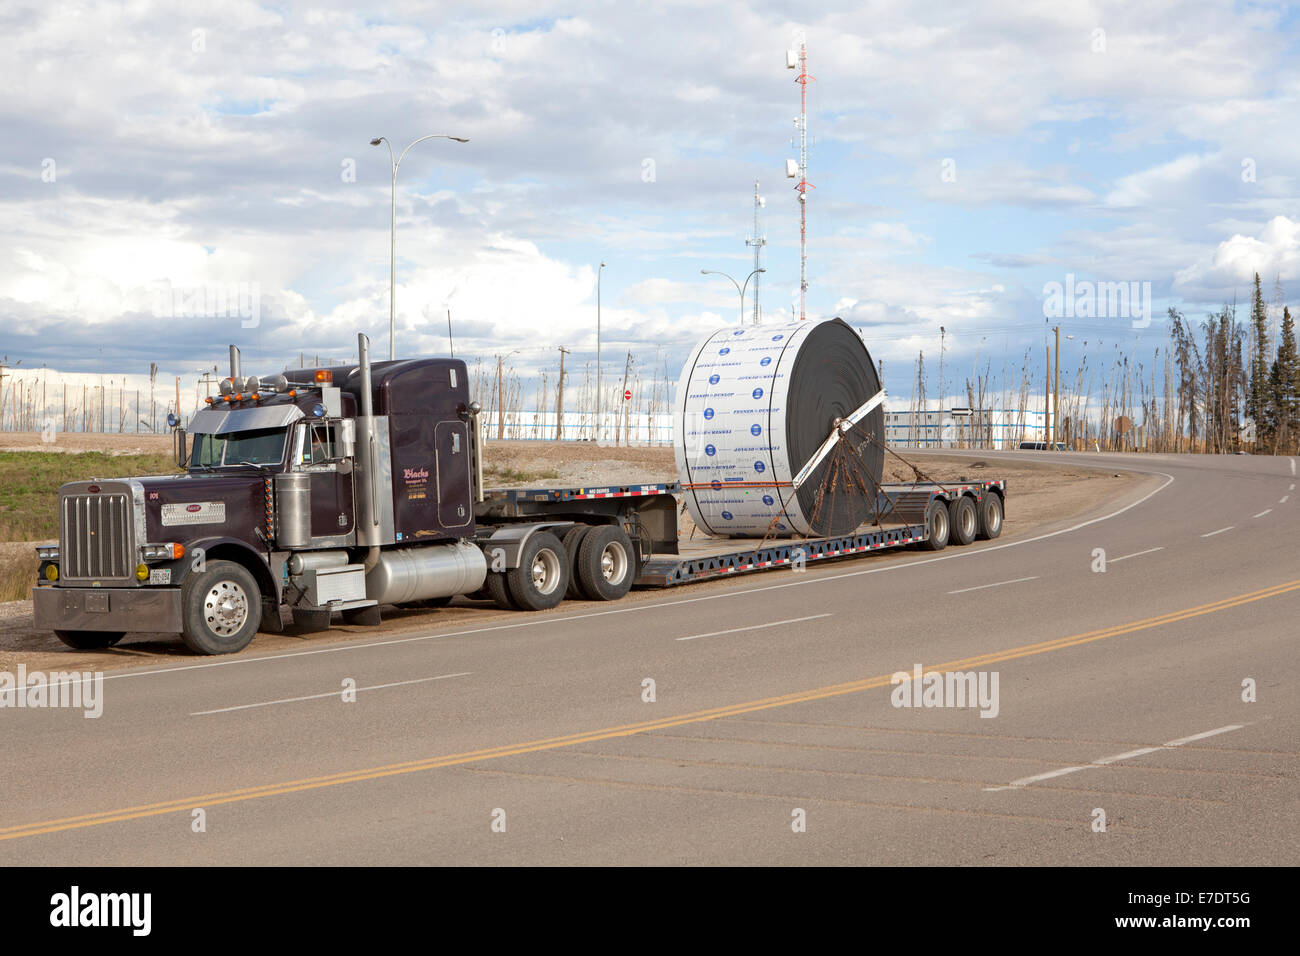 Heavy haulage truck carrying industrial load parked on roadside, Fort McMurray, Alberta, Canada Stock Photo